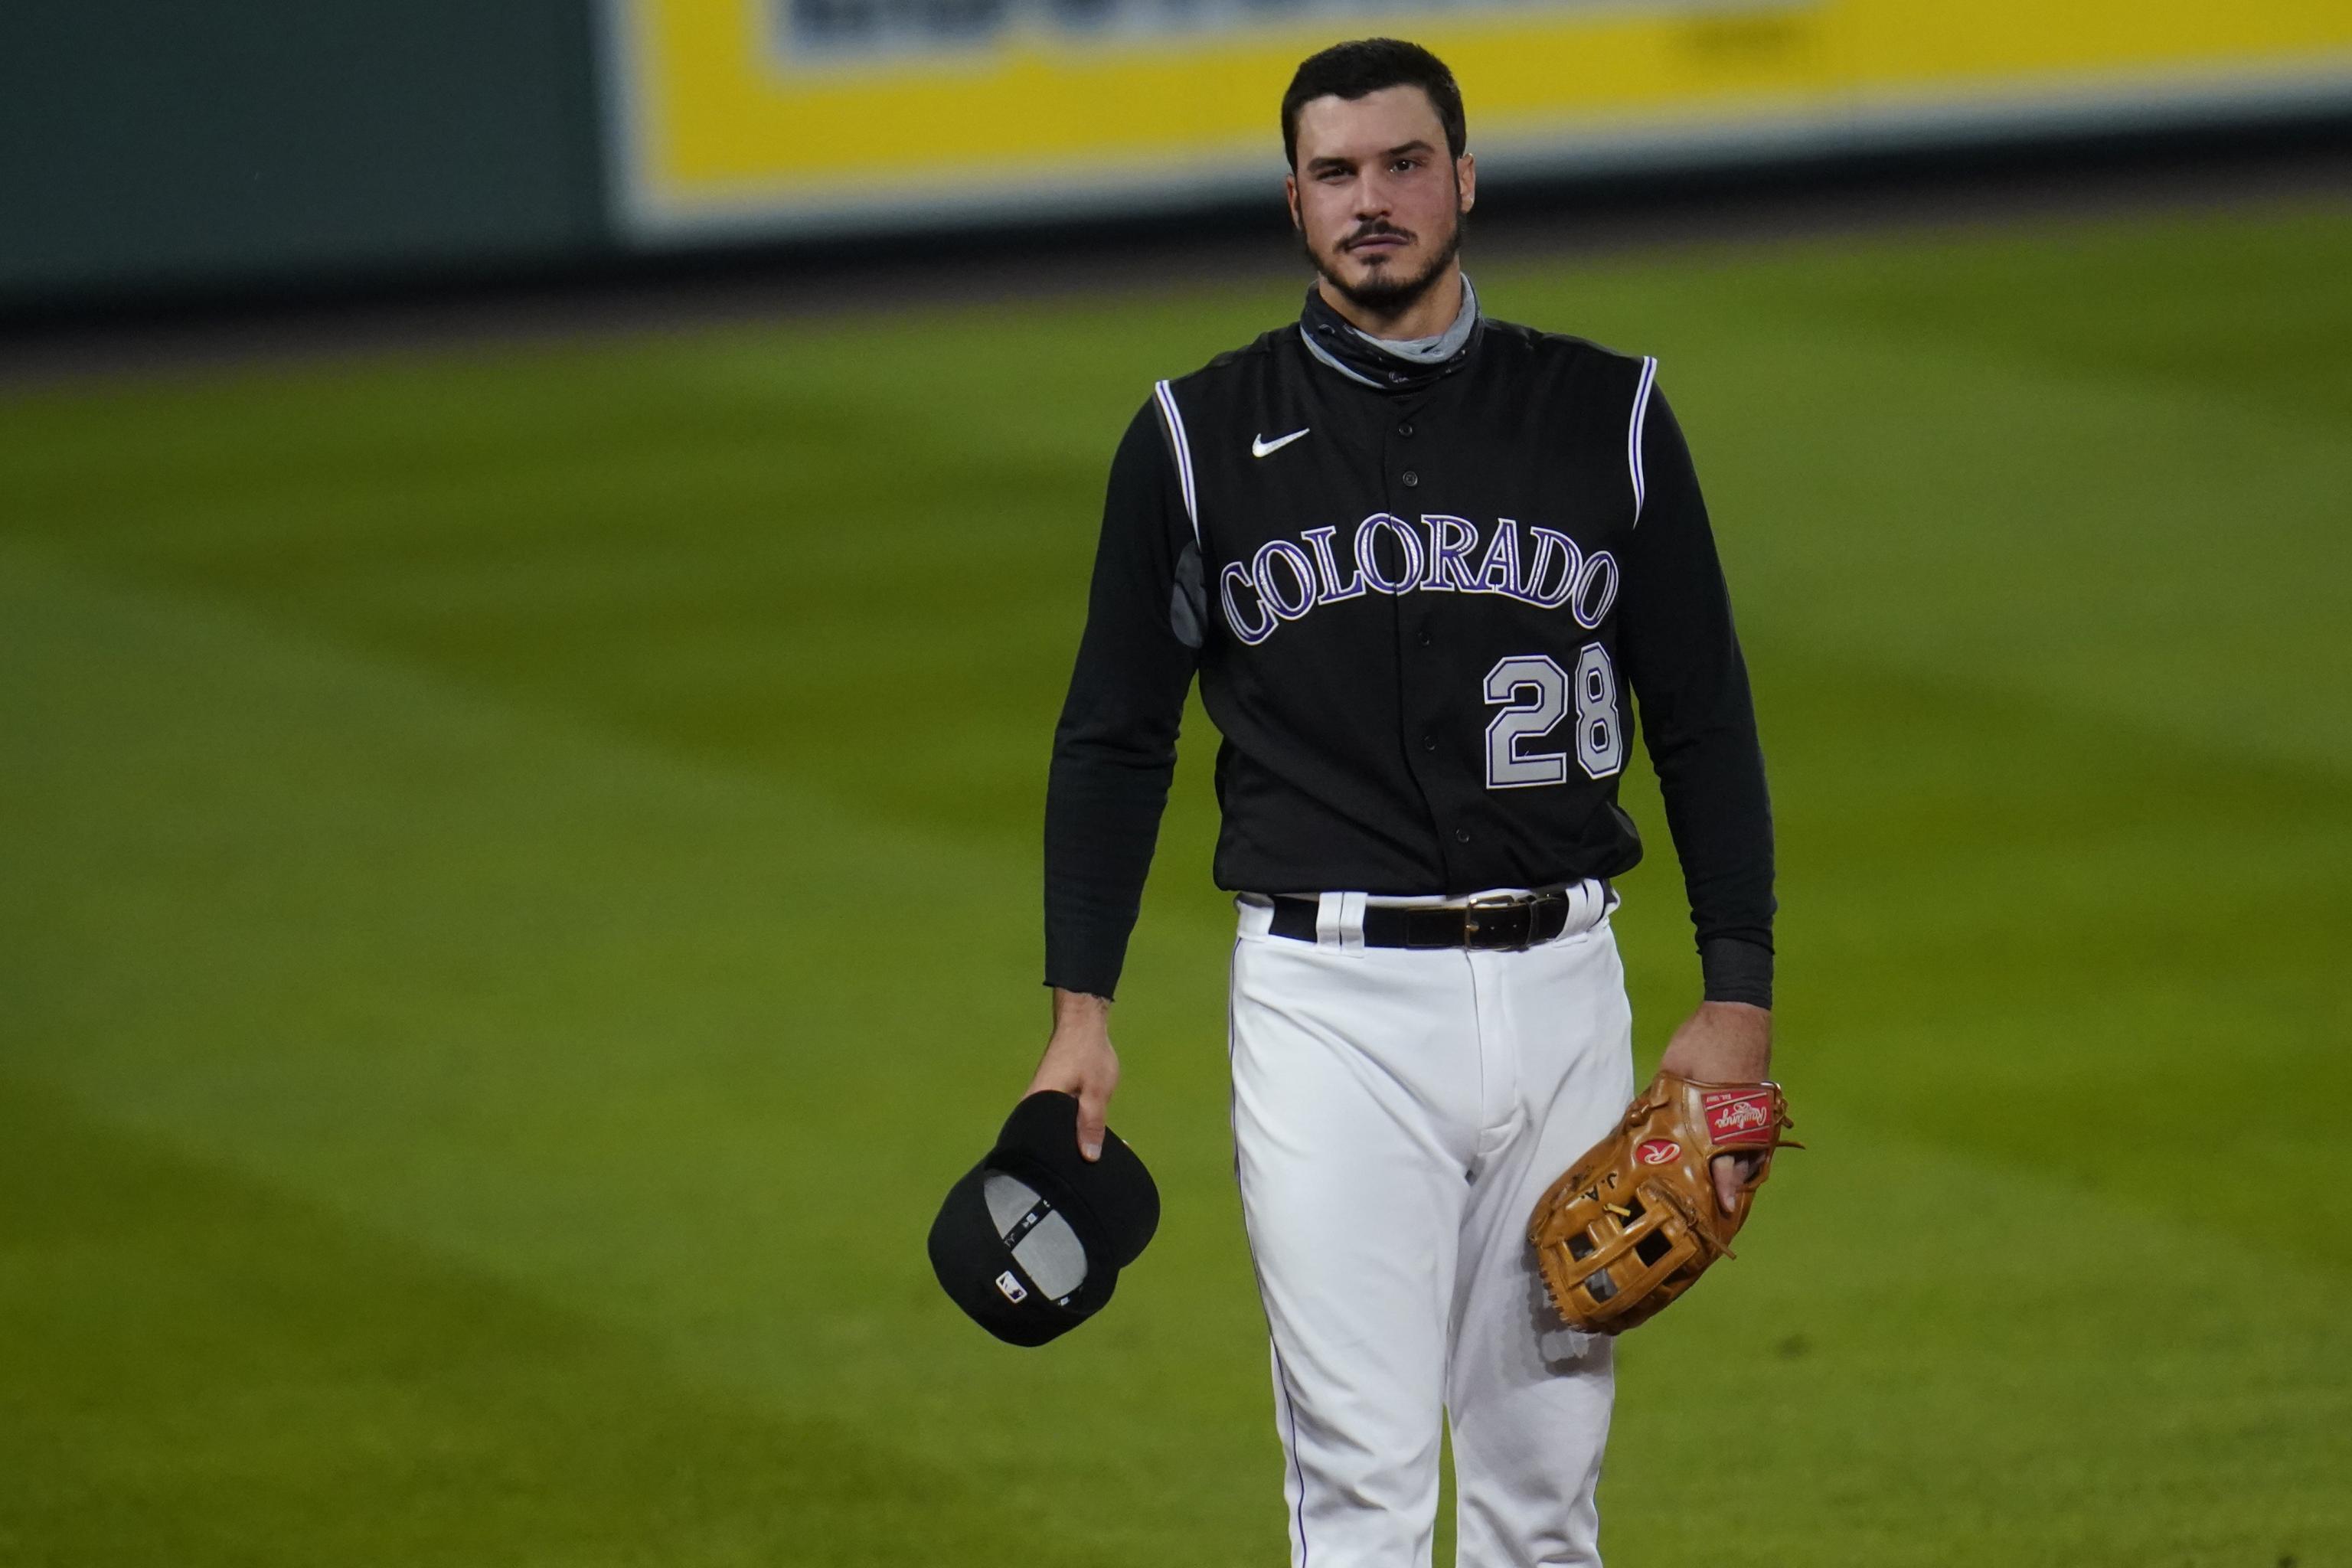 Nolan Arenado Says He Isn't Planning to Exercise Opt Outs in